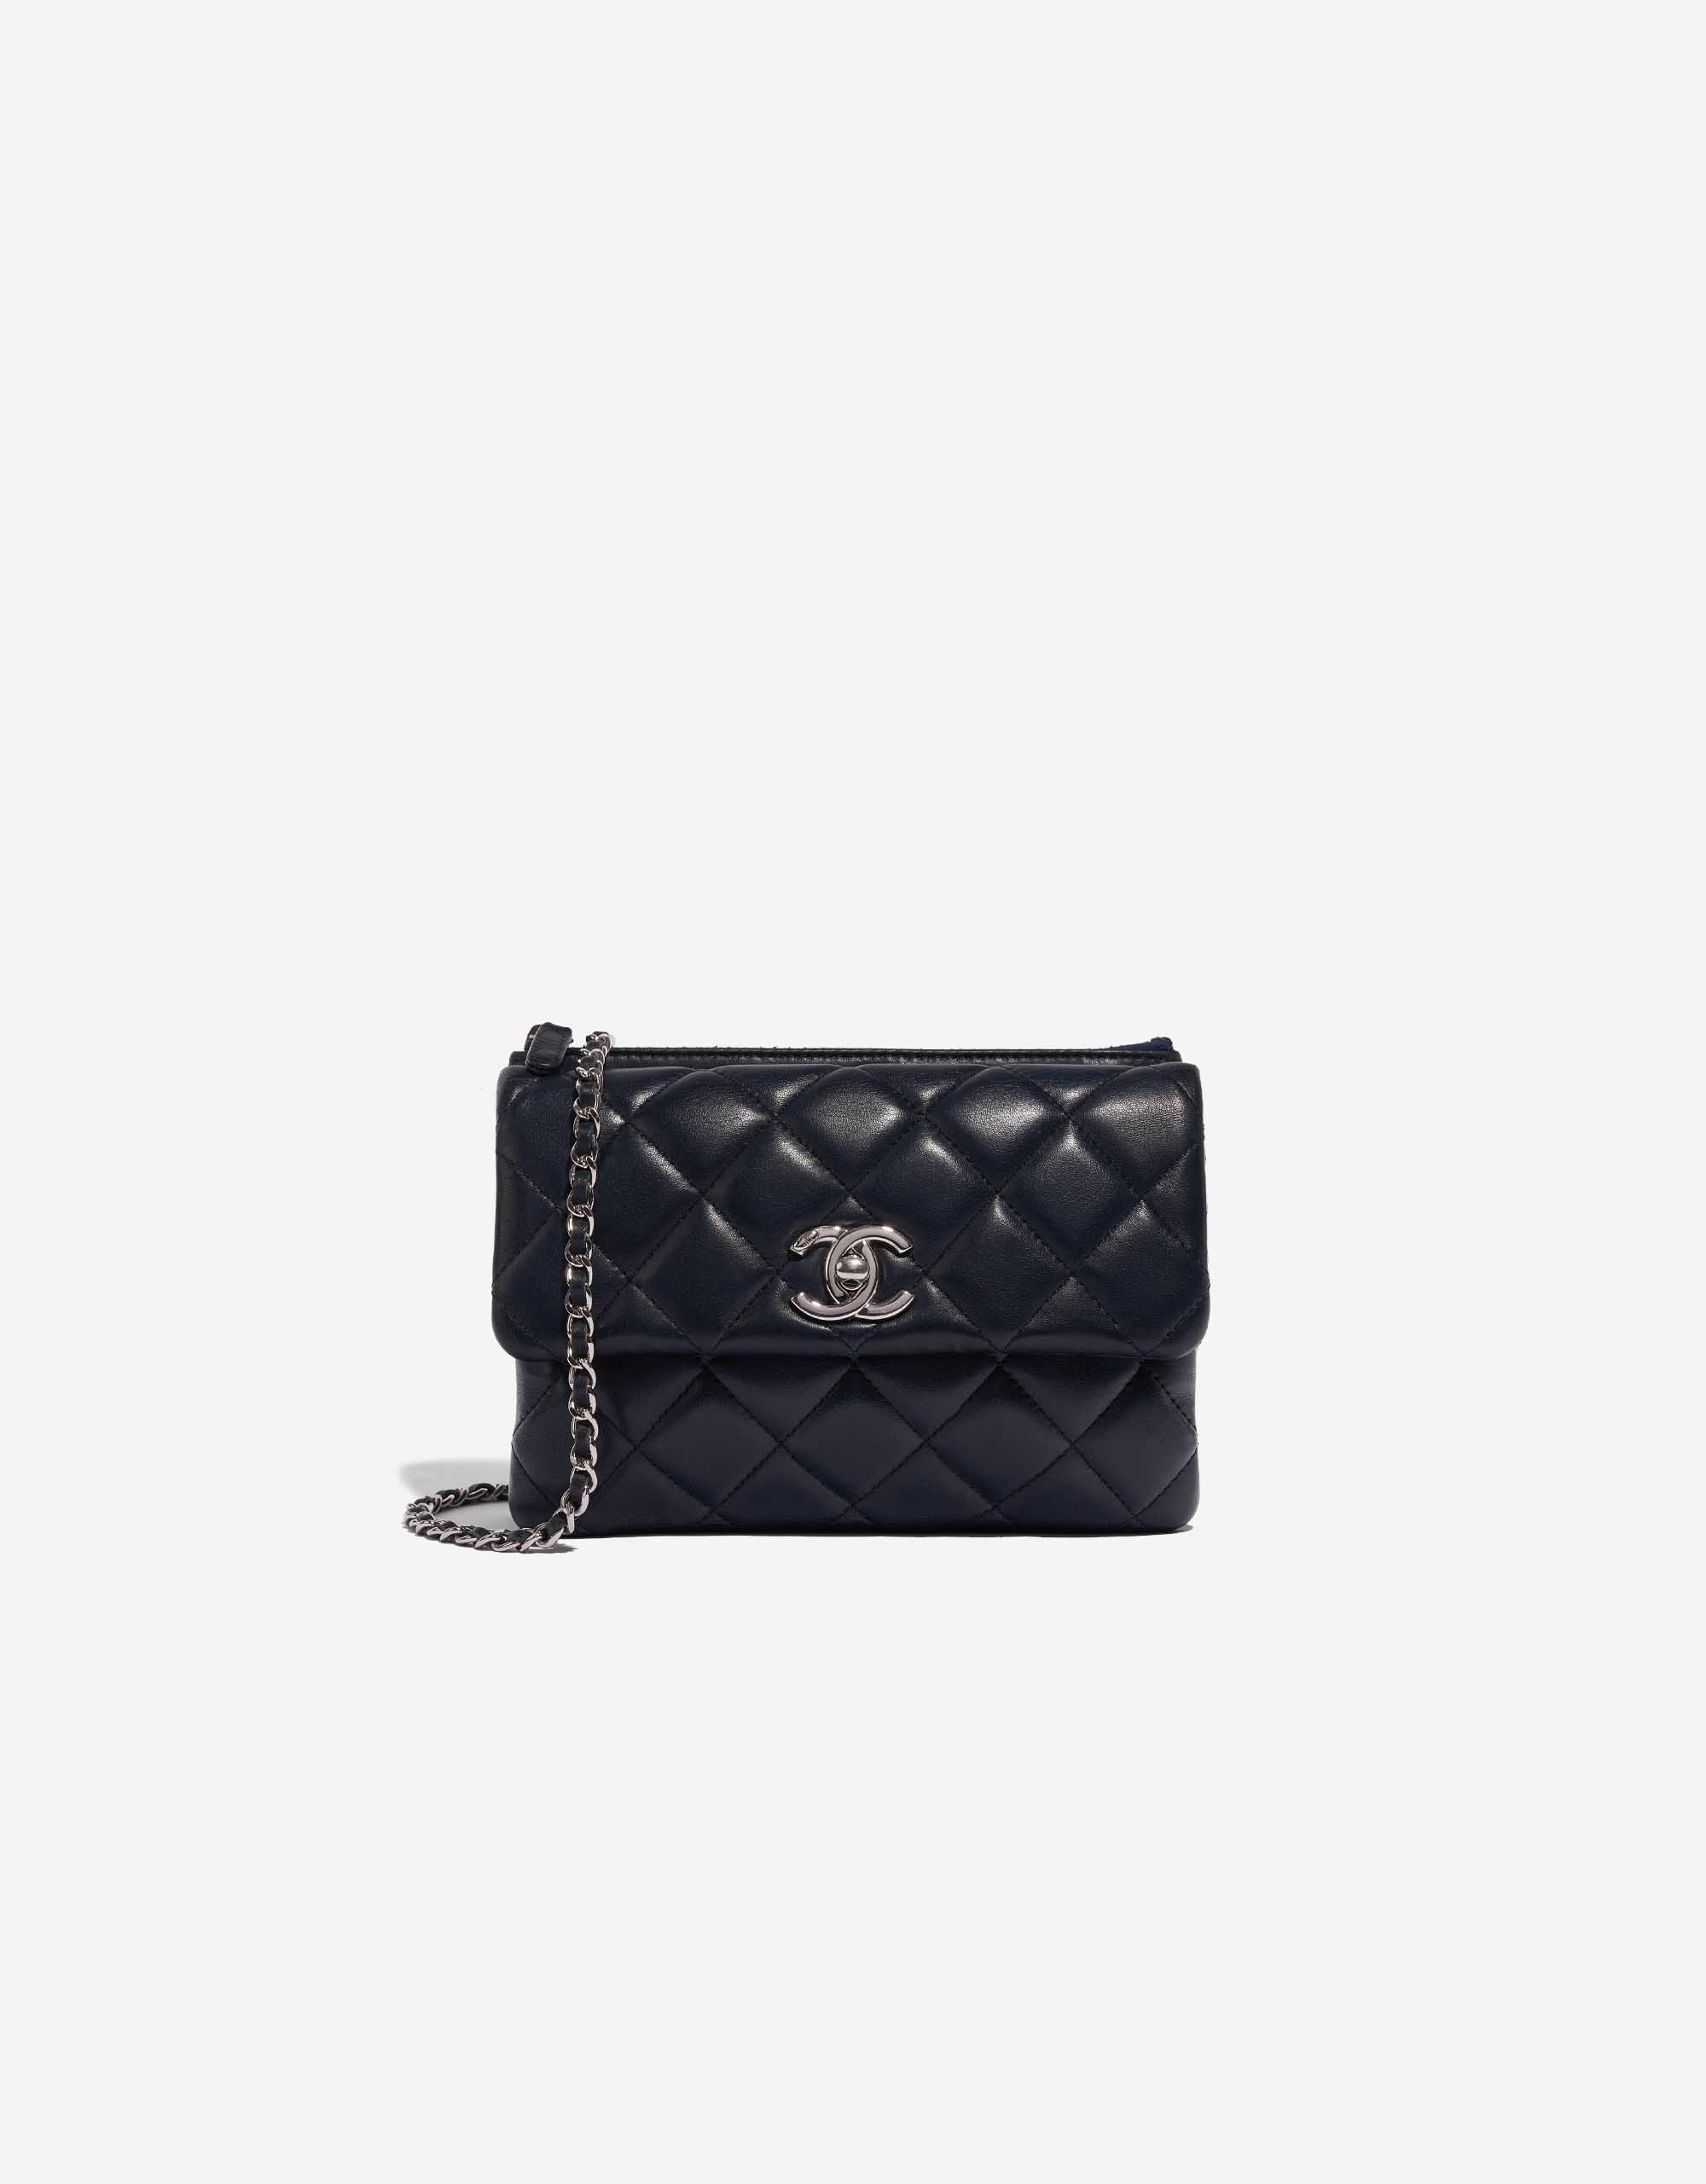 Chanel 2018 Black Quilted Lambskin Leather 10 Medium Classic Double Flap Bag w/ Silvertone Hardware